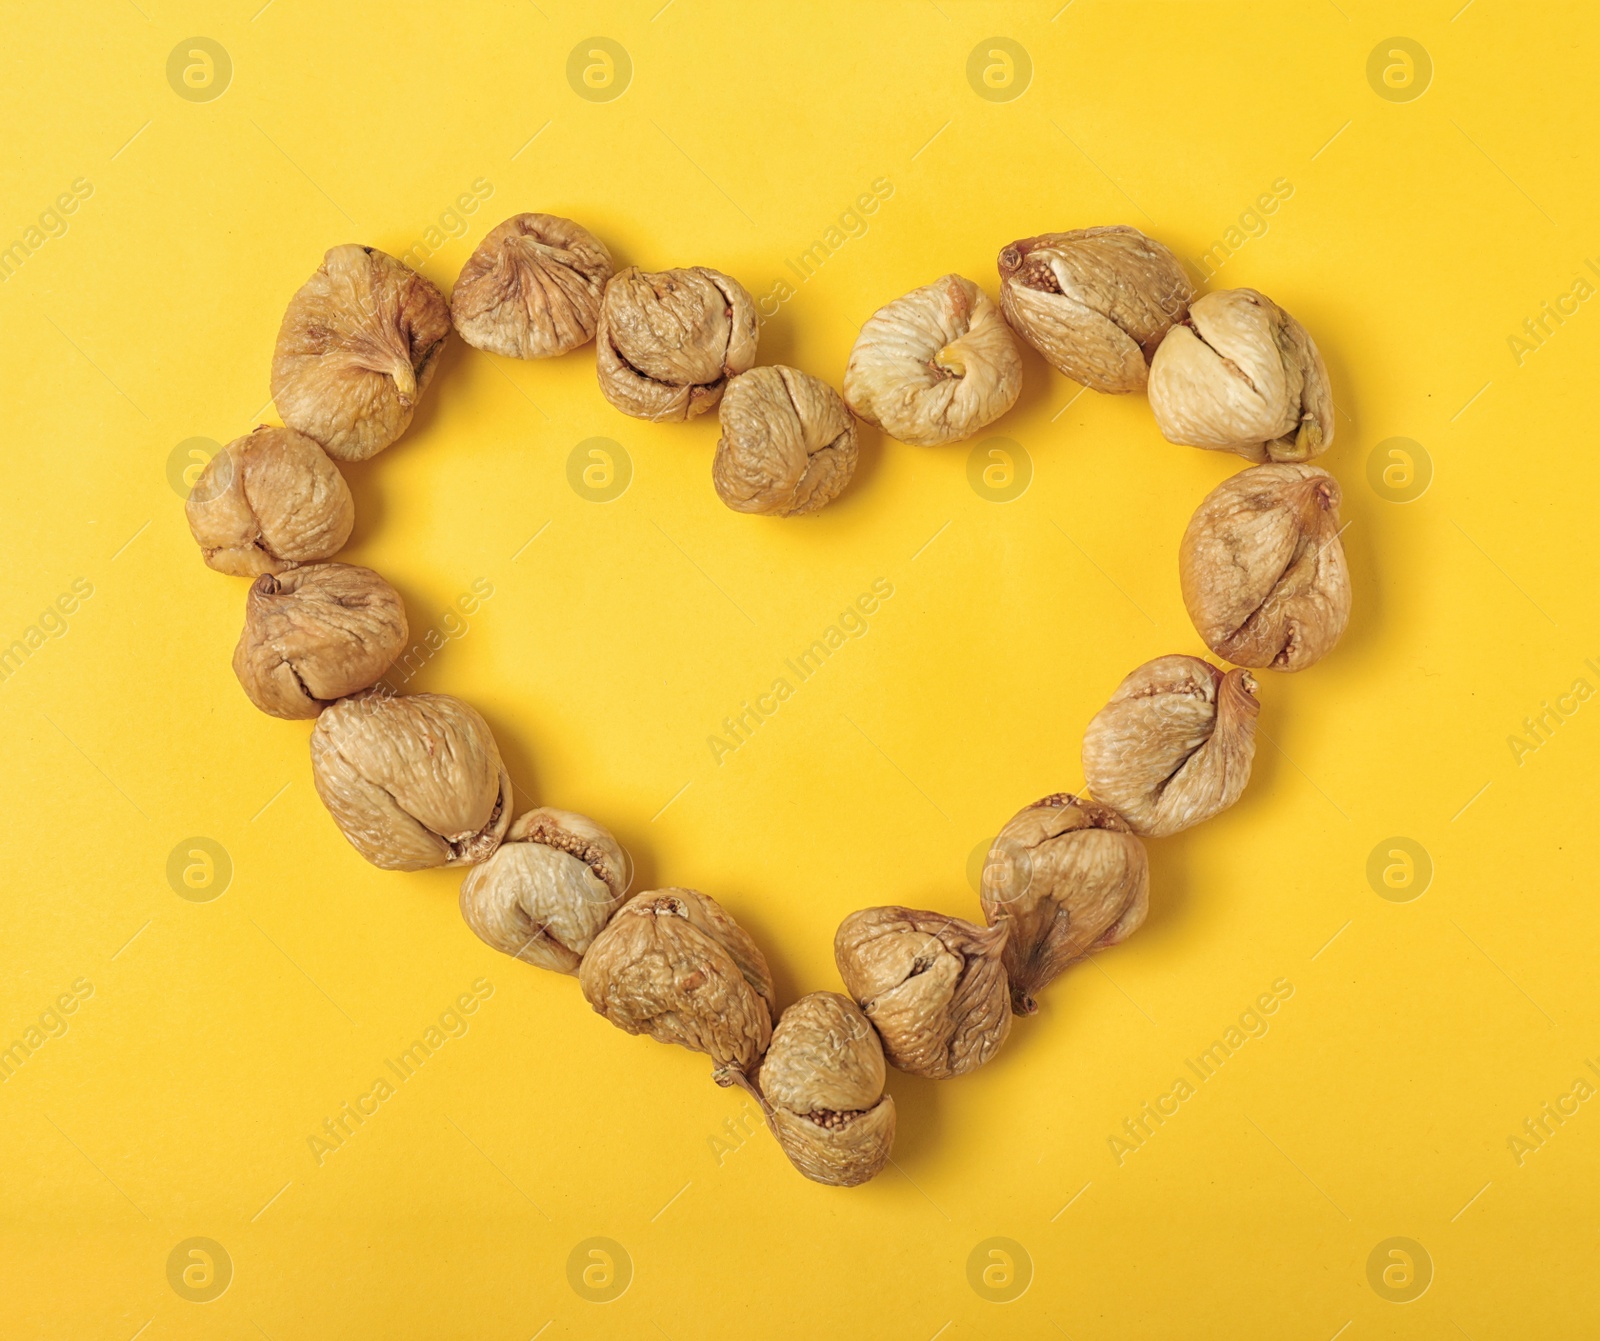 Photo of Heart shaped frame made of dried figs on color background, top view with space for text. Healthy fruit